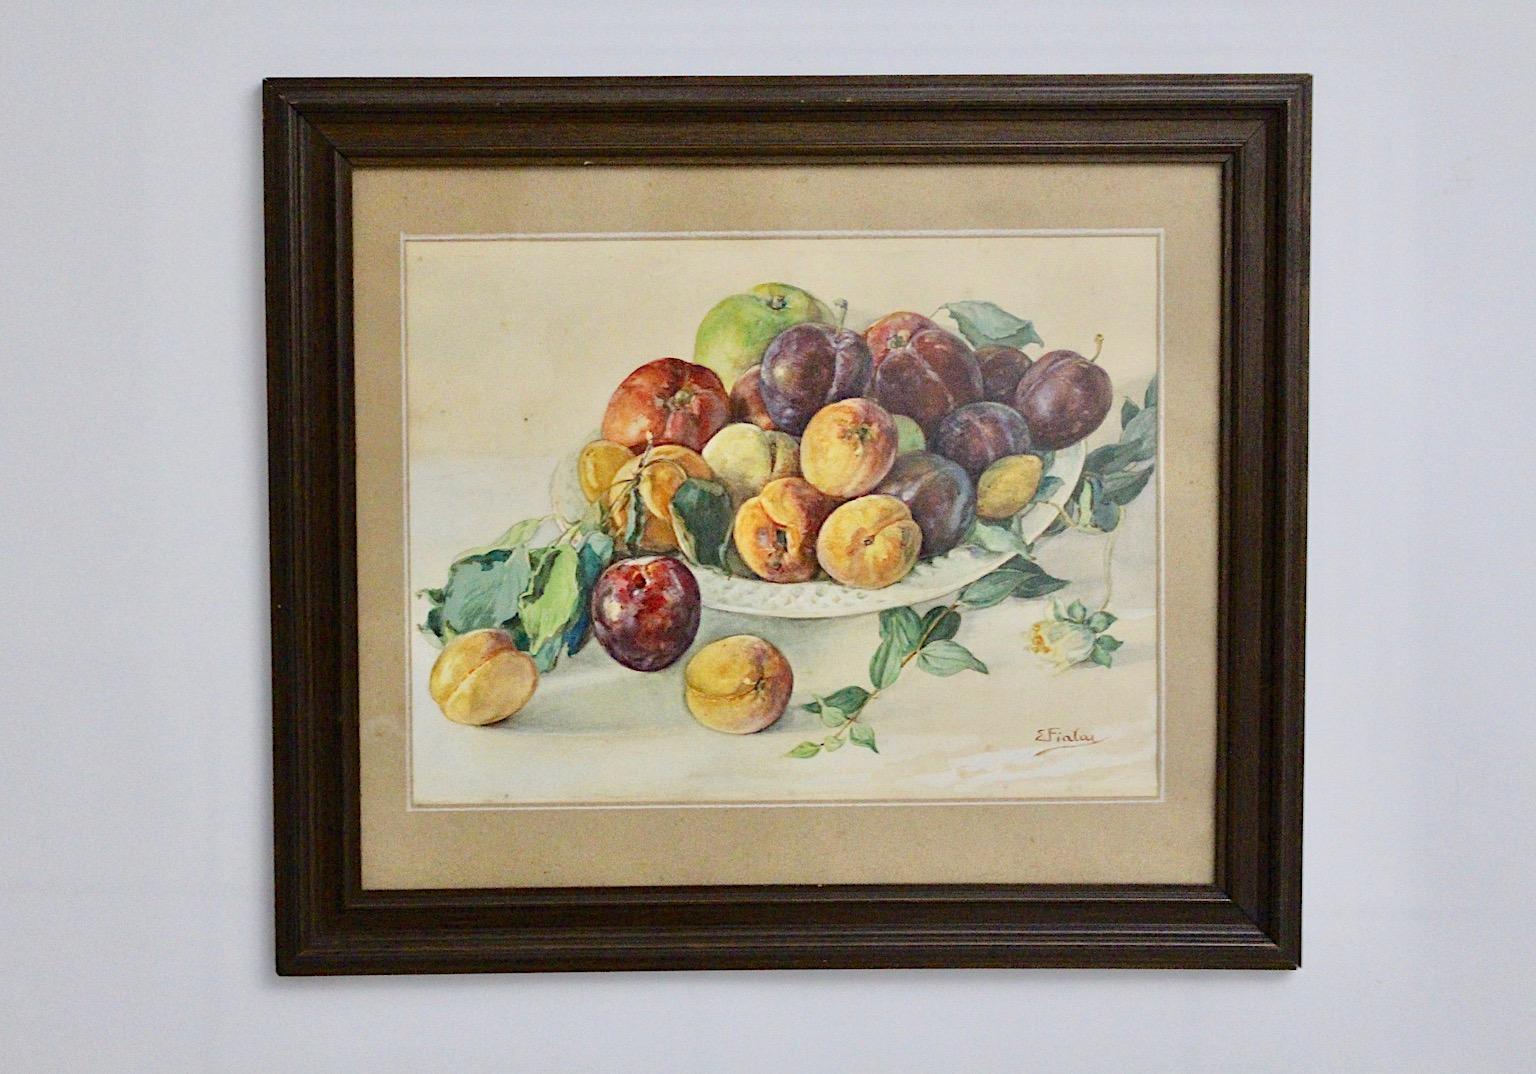 A painting with the motif fruits in a bowl painted, which was painted with watercolors by Emil Fiala.
Emil Fiala (1869-1960) was a member of the Austrian Künstlerbund formerly Hagenbund from 1915-1937.
A simple brown wooden frame point out the